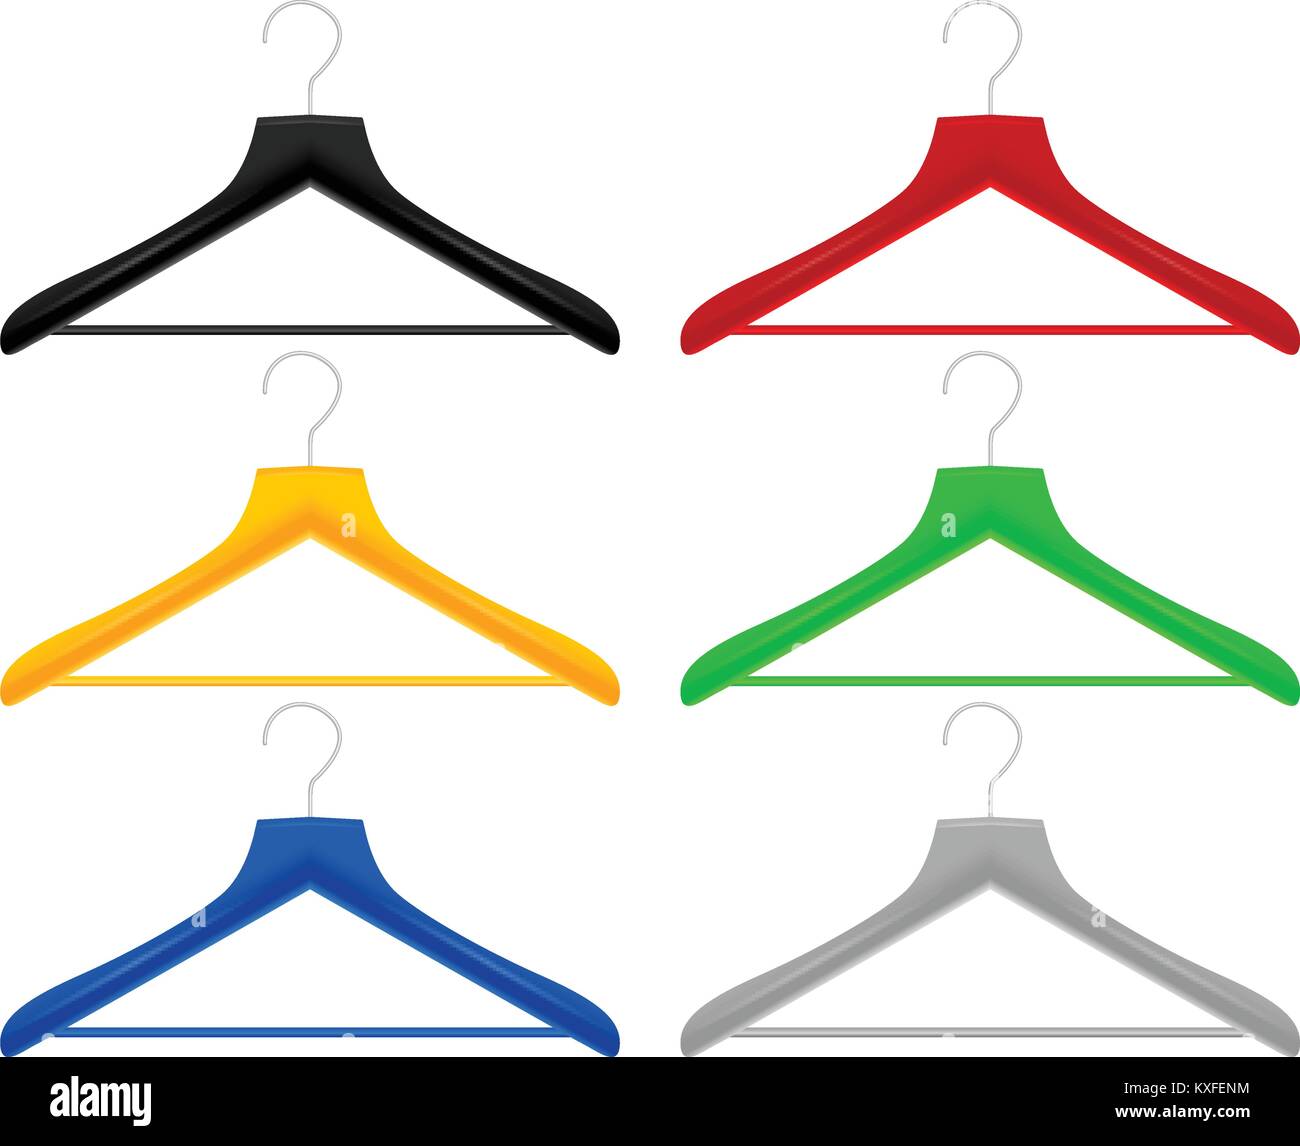 Plastic color hangers on a white background. Stock Vector